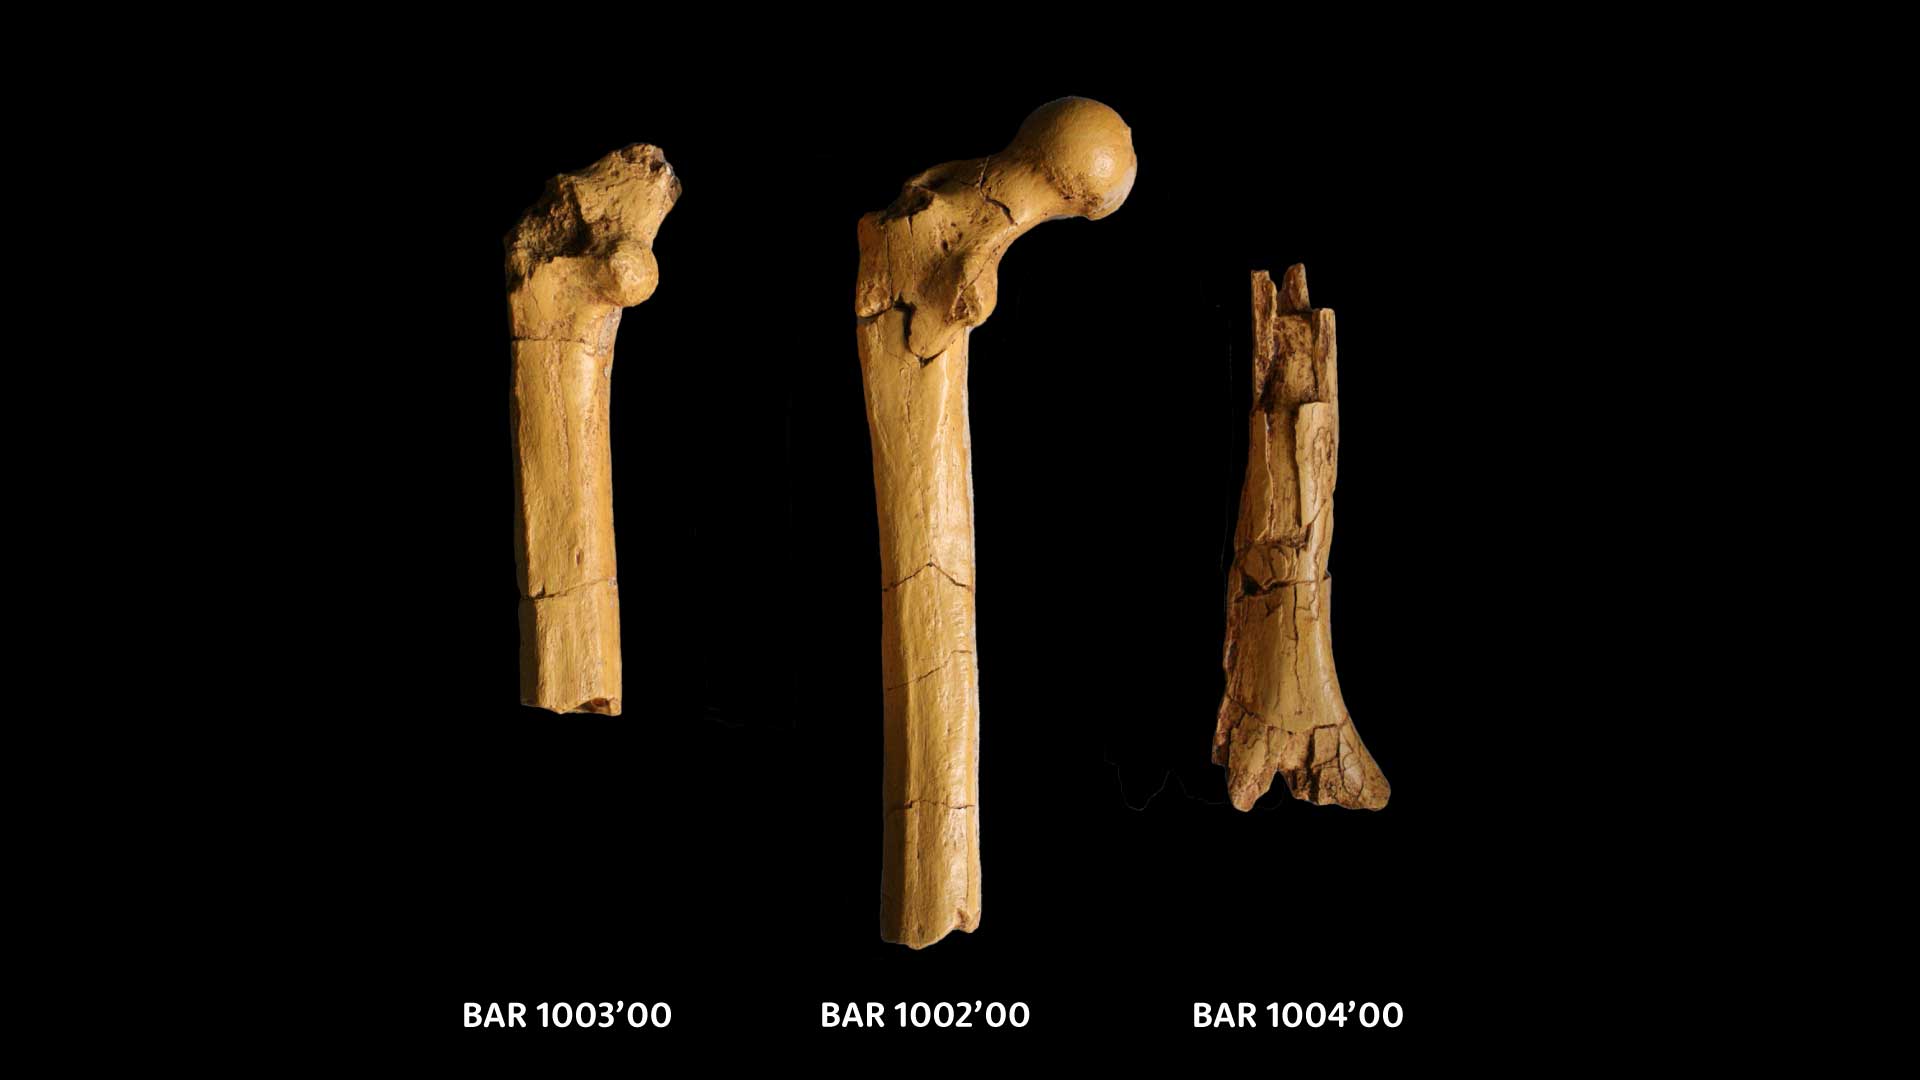 Two femora and one humerus with labels: BAR 1003'00, BAR 1002'00, and BAR 1004'00